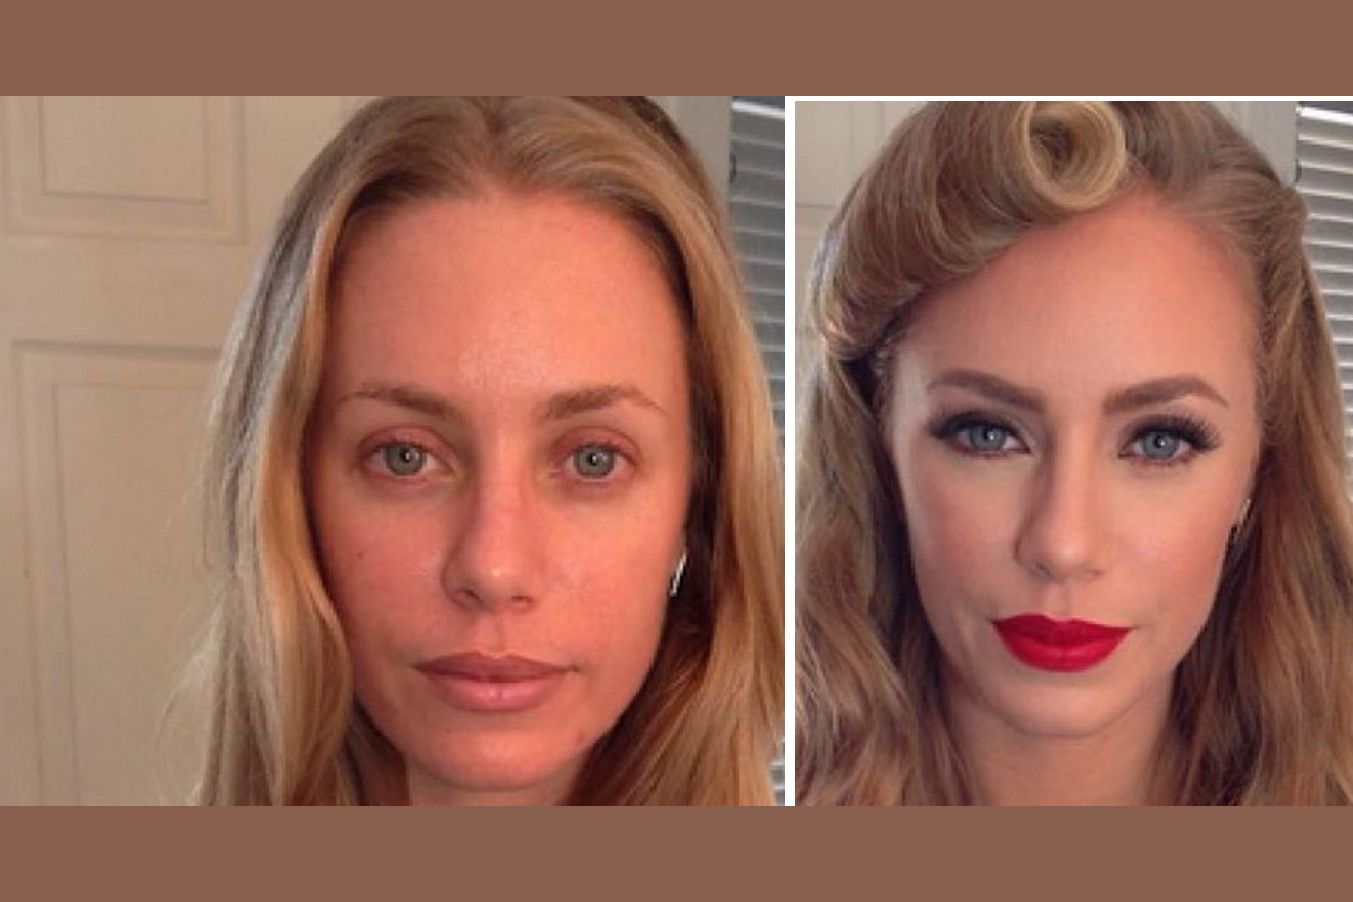 caroline tabet recommends nicole aniston without makeup pic